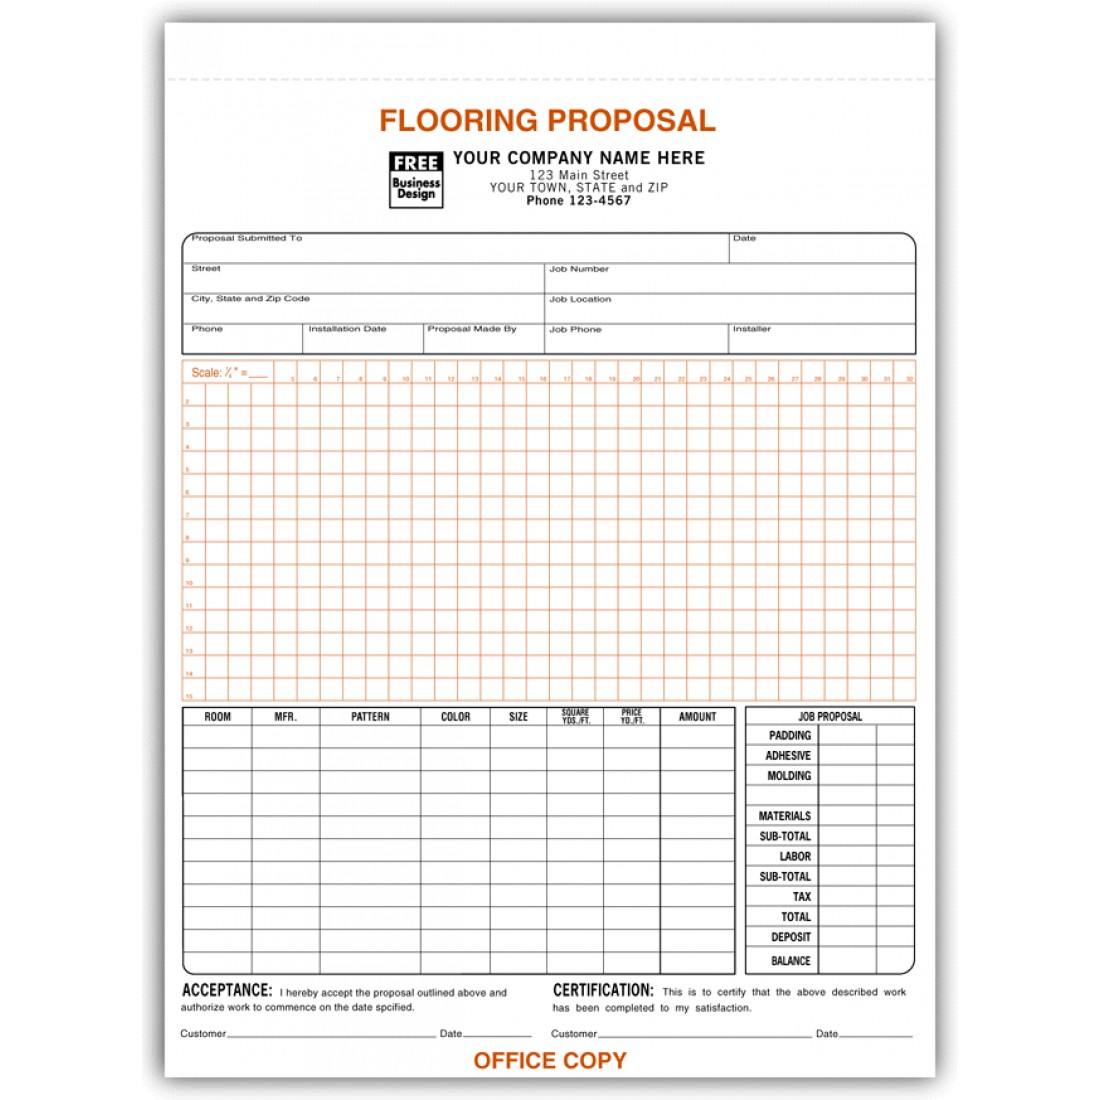 Flooring Proposal Forms with Signature Free Shipping